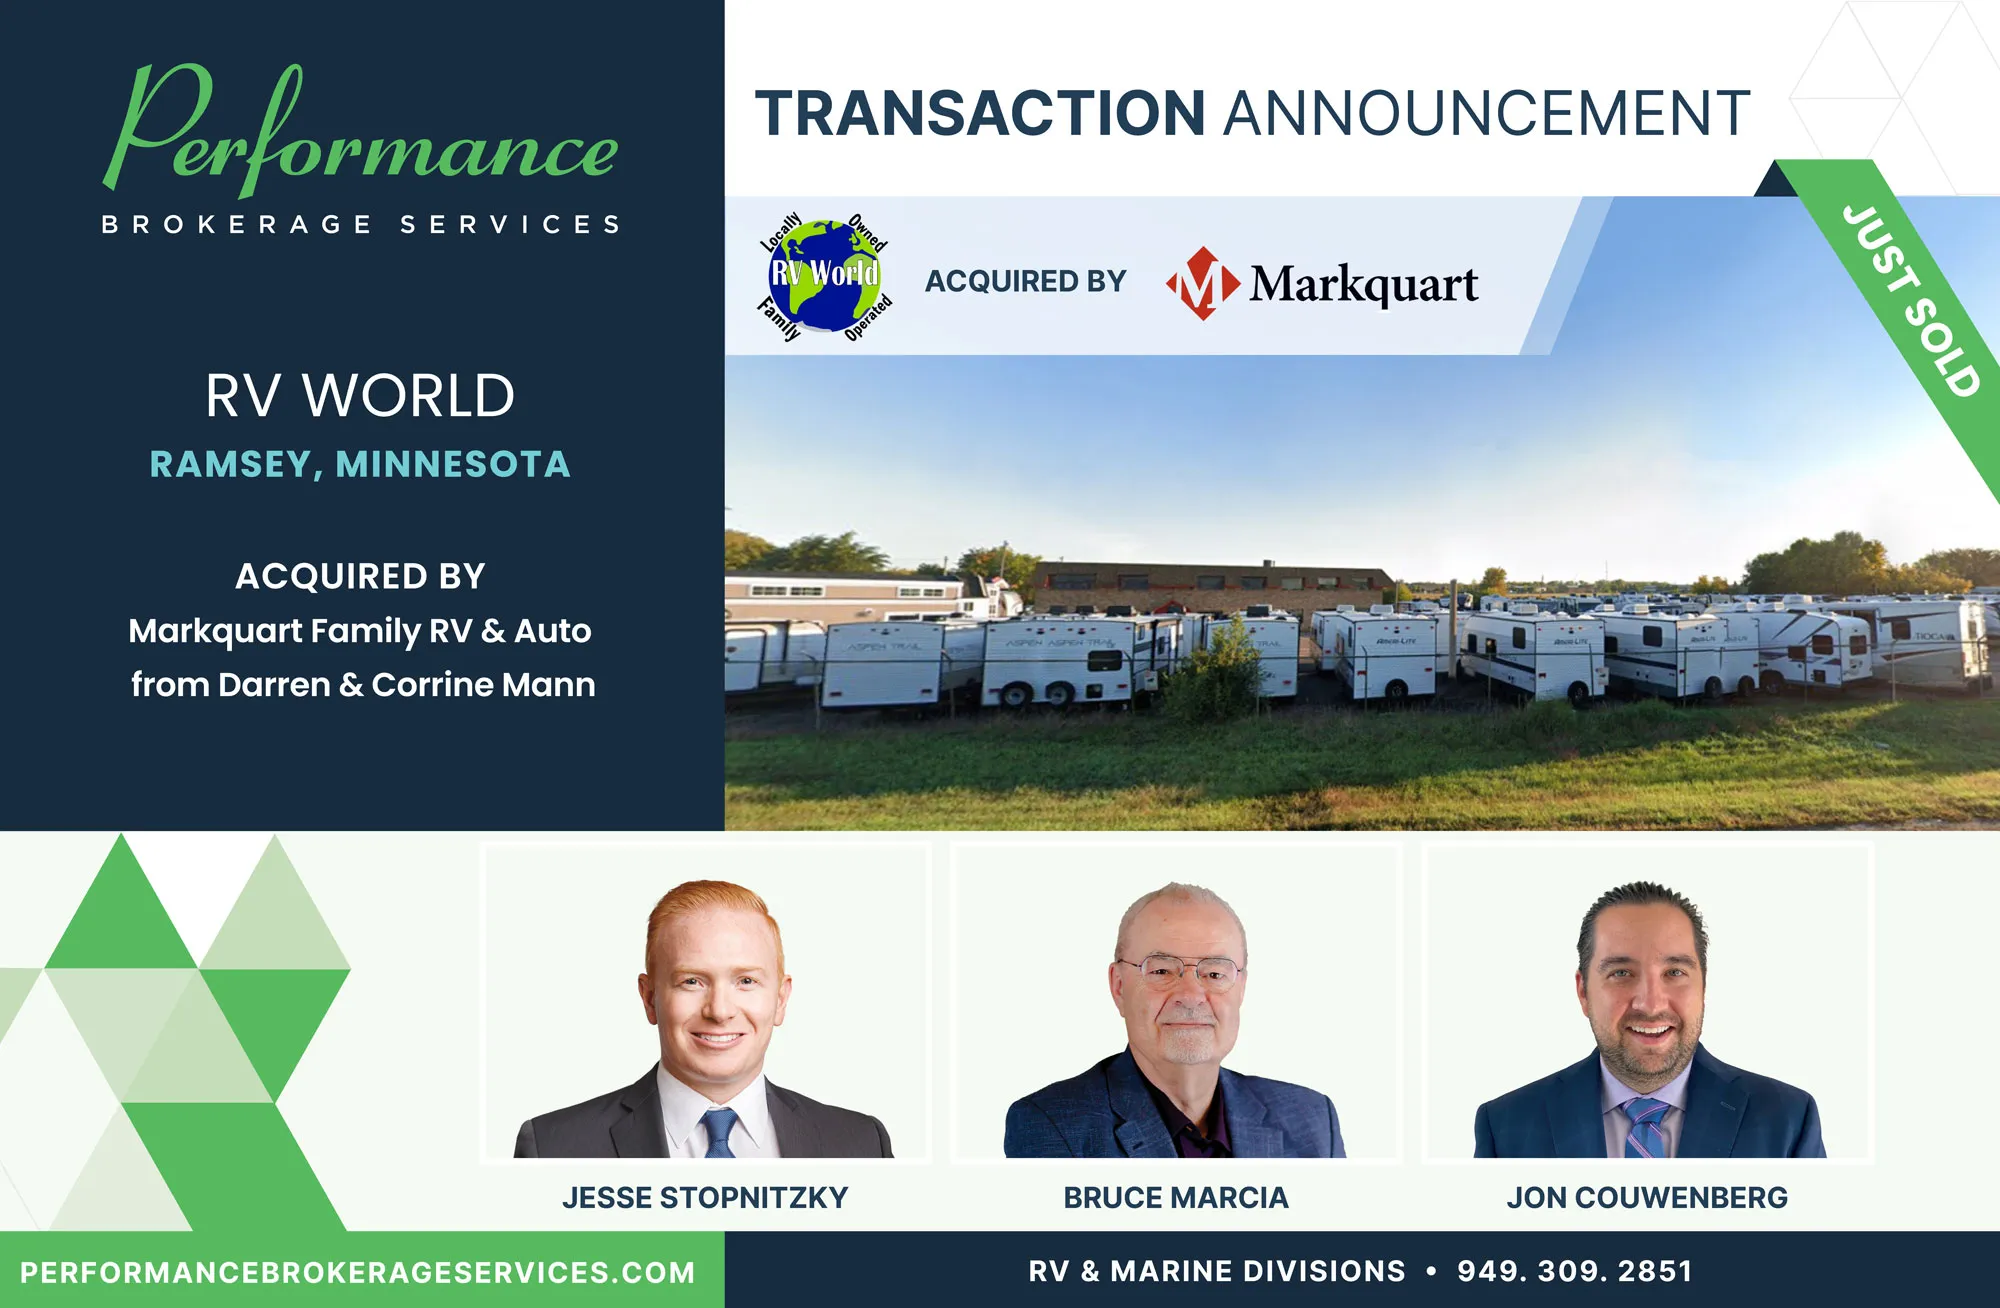 RV World sells to Markquart Family RV & Auto with Performance Brokerage